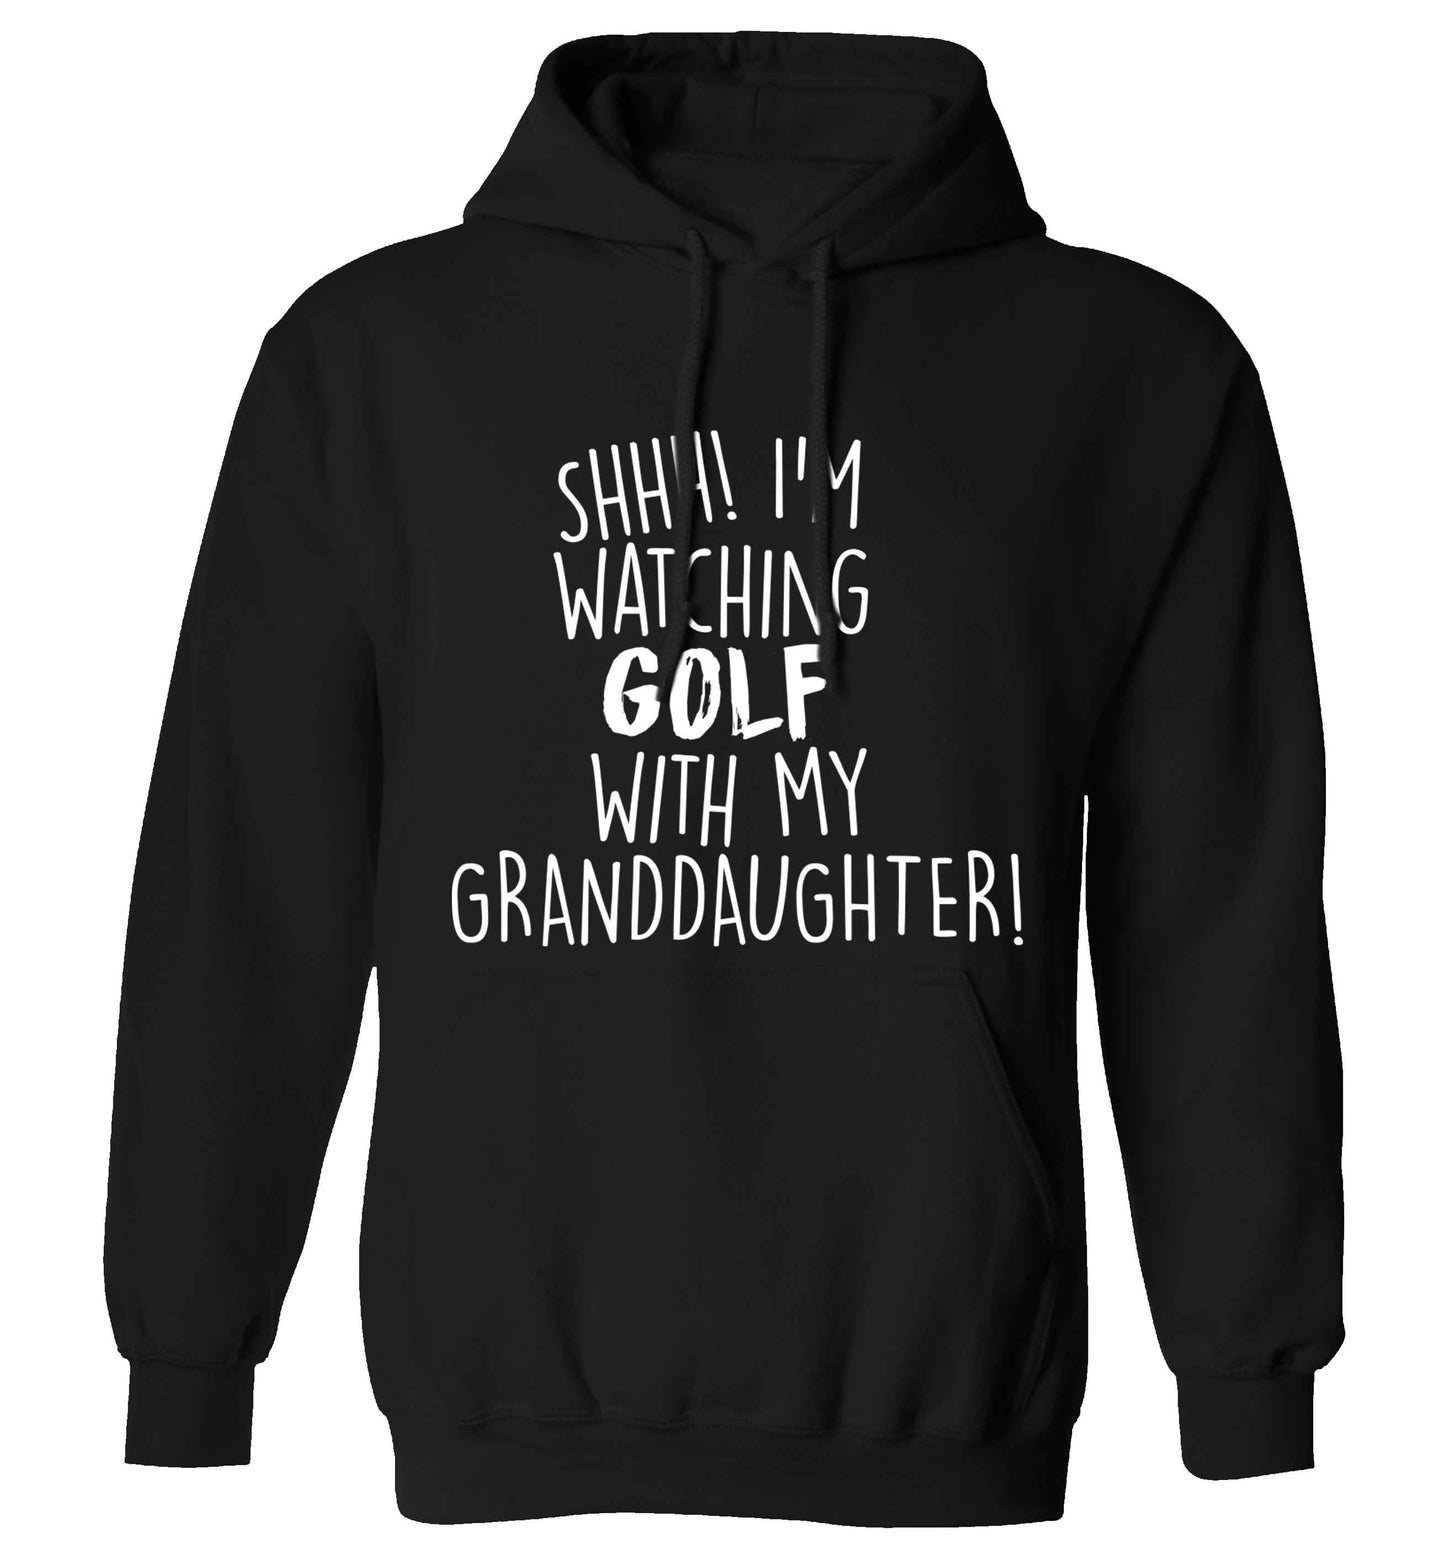 Shh I'm watching golf with my granddaughter adults unisex black hoodie 2XL